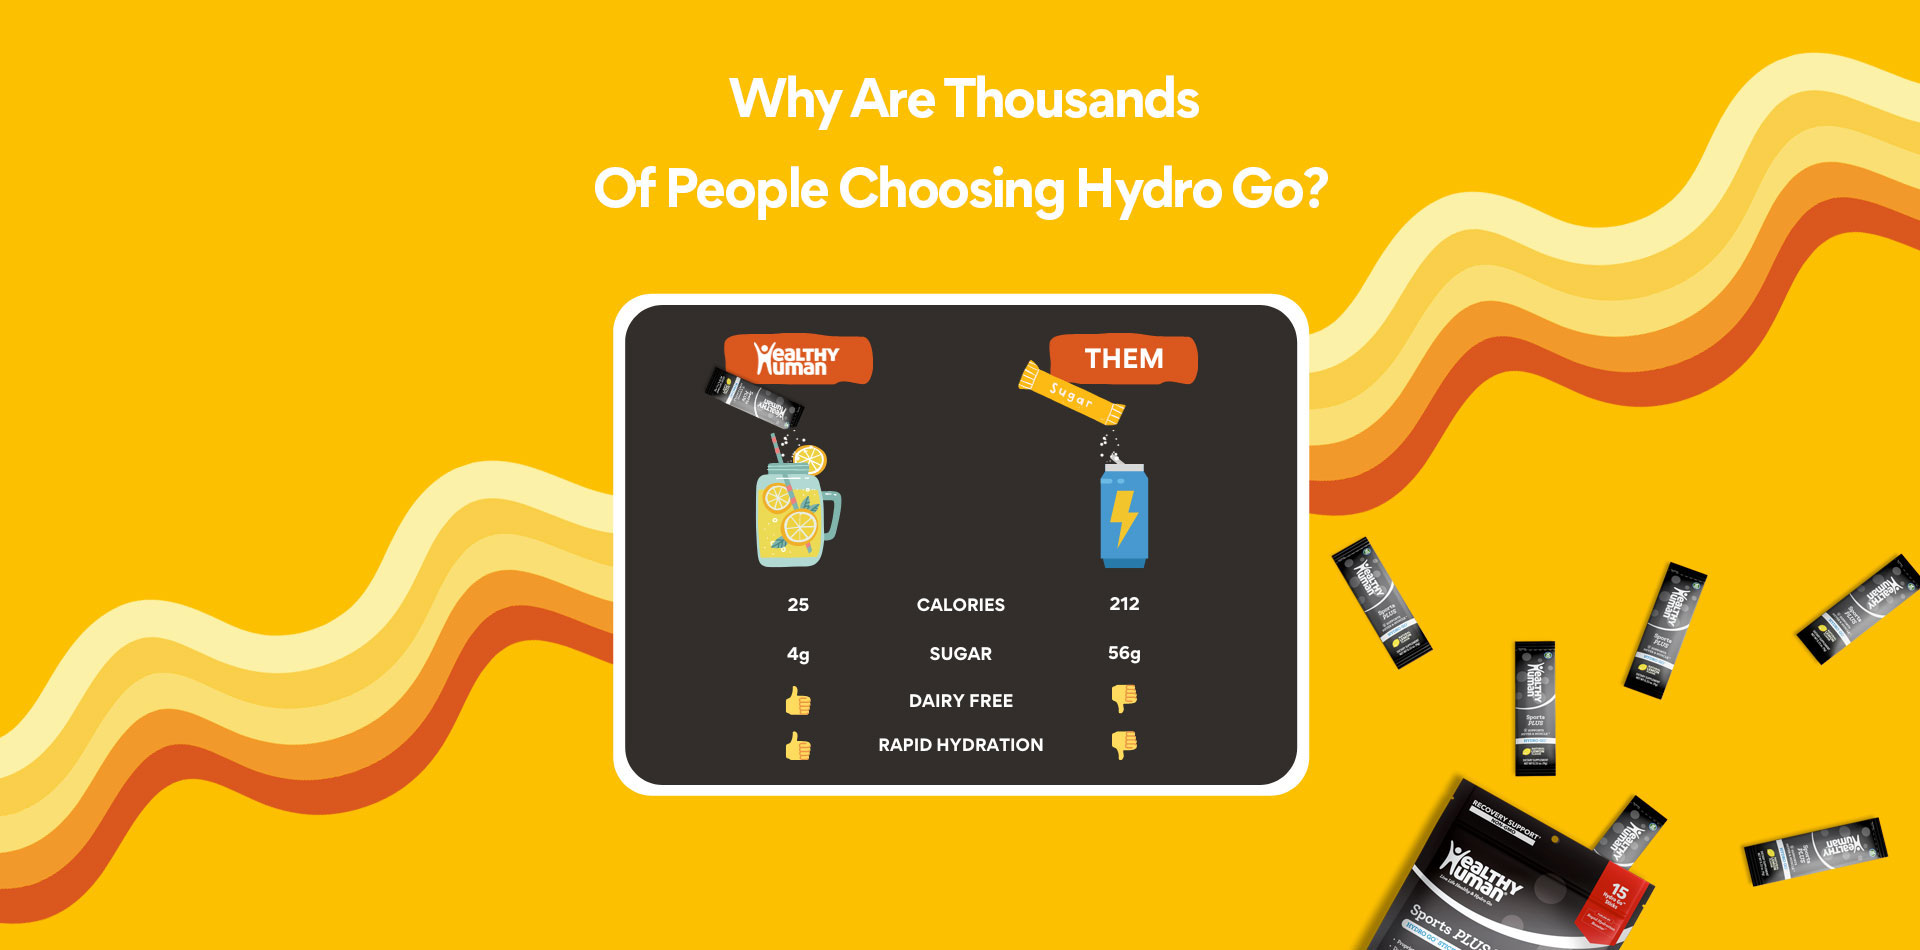 Why are people choosing Hydro Go